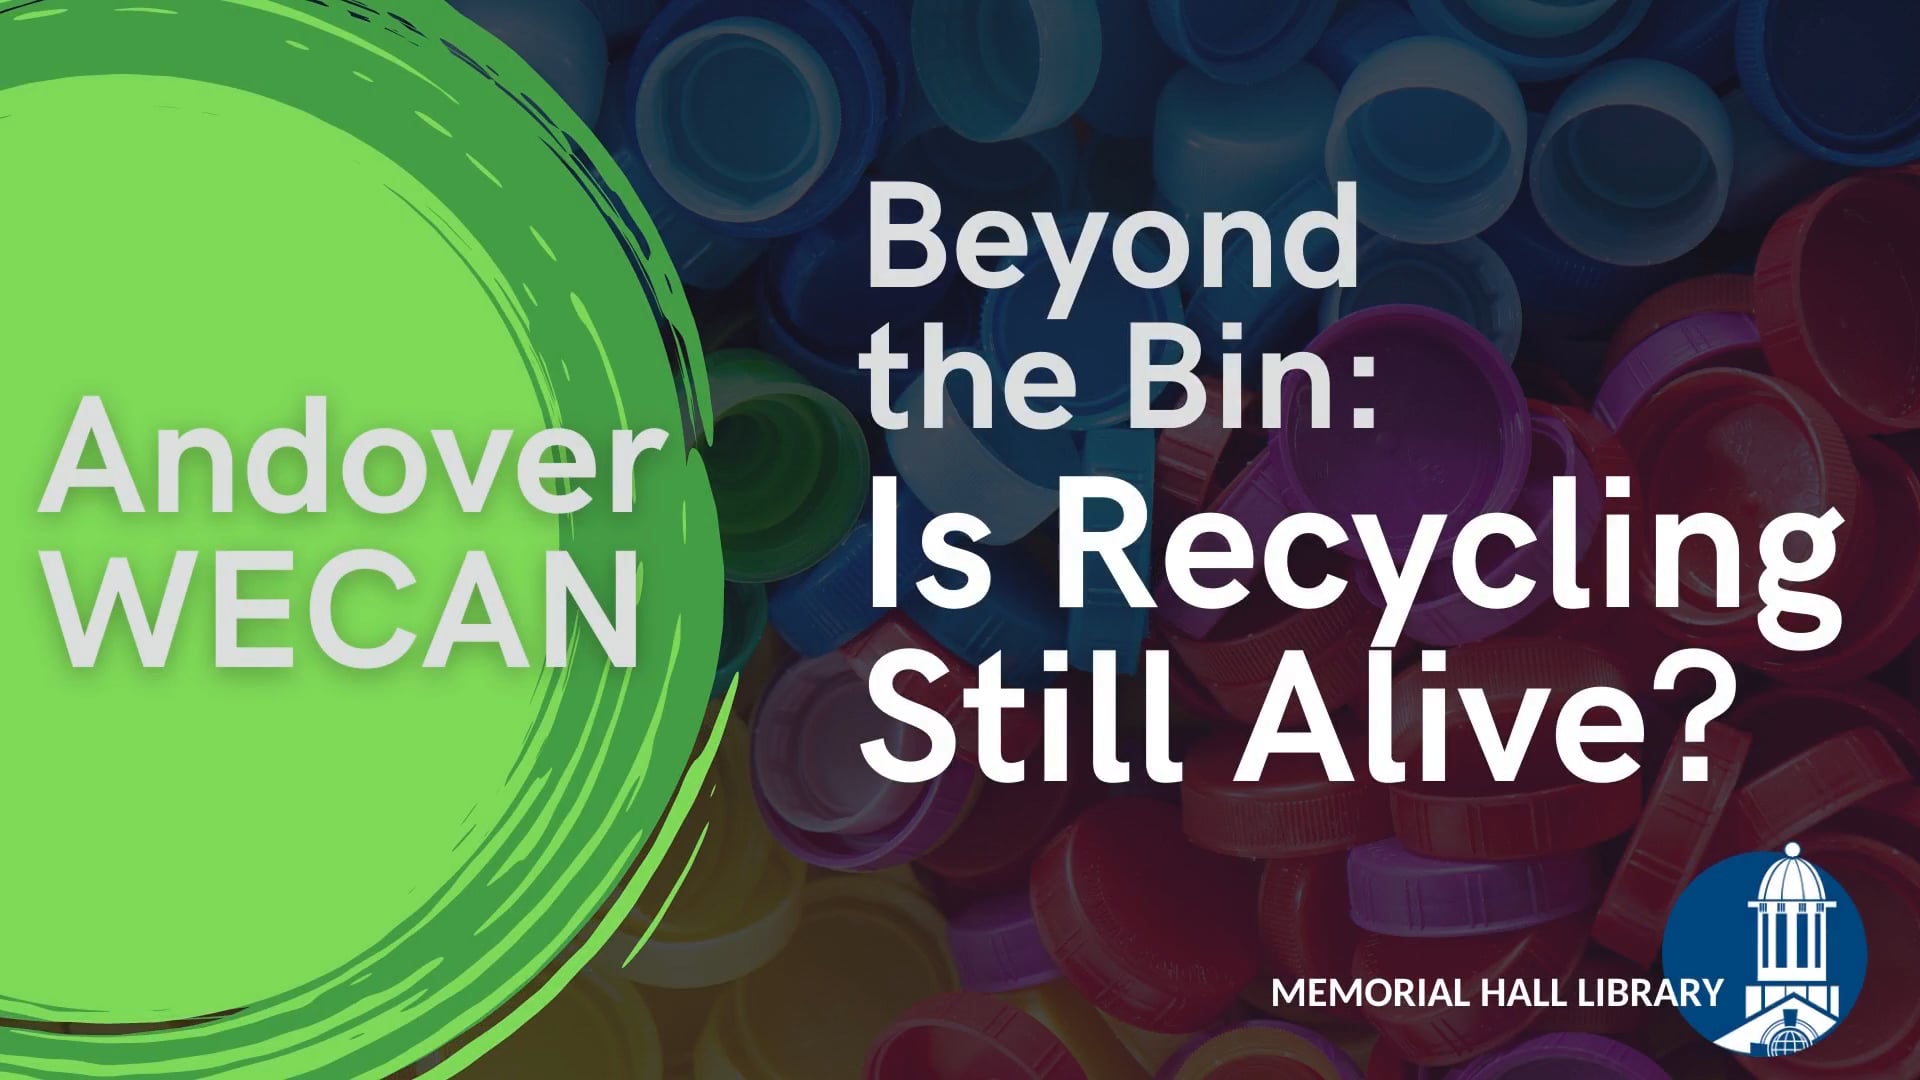 Andover WECAN Beyond the Bin Is Recycling Still Alive? April 1, 2021